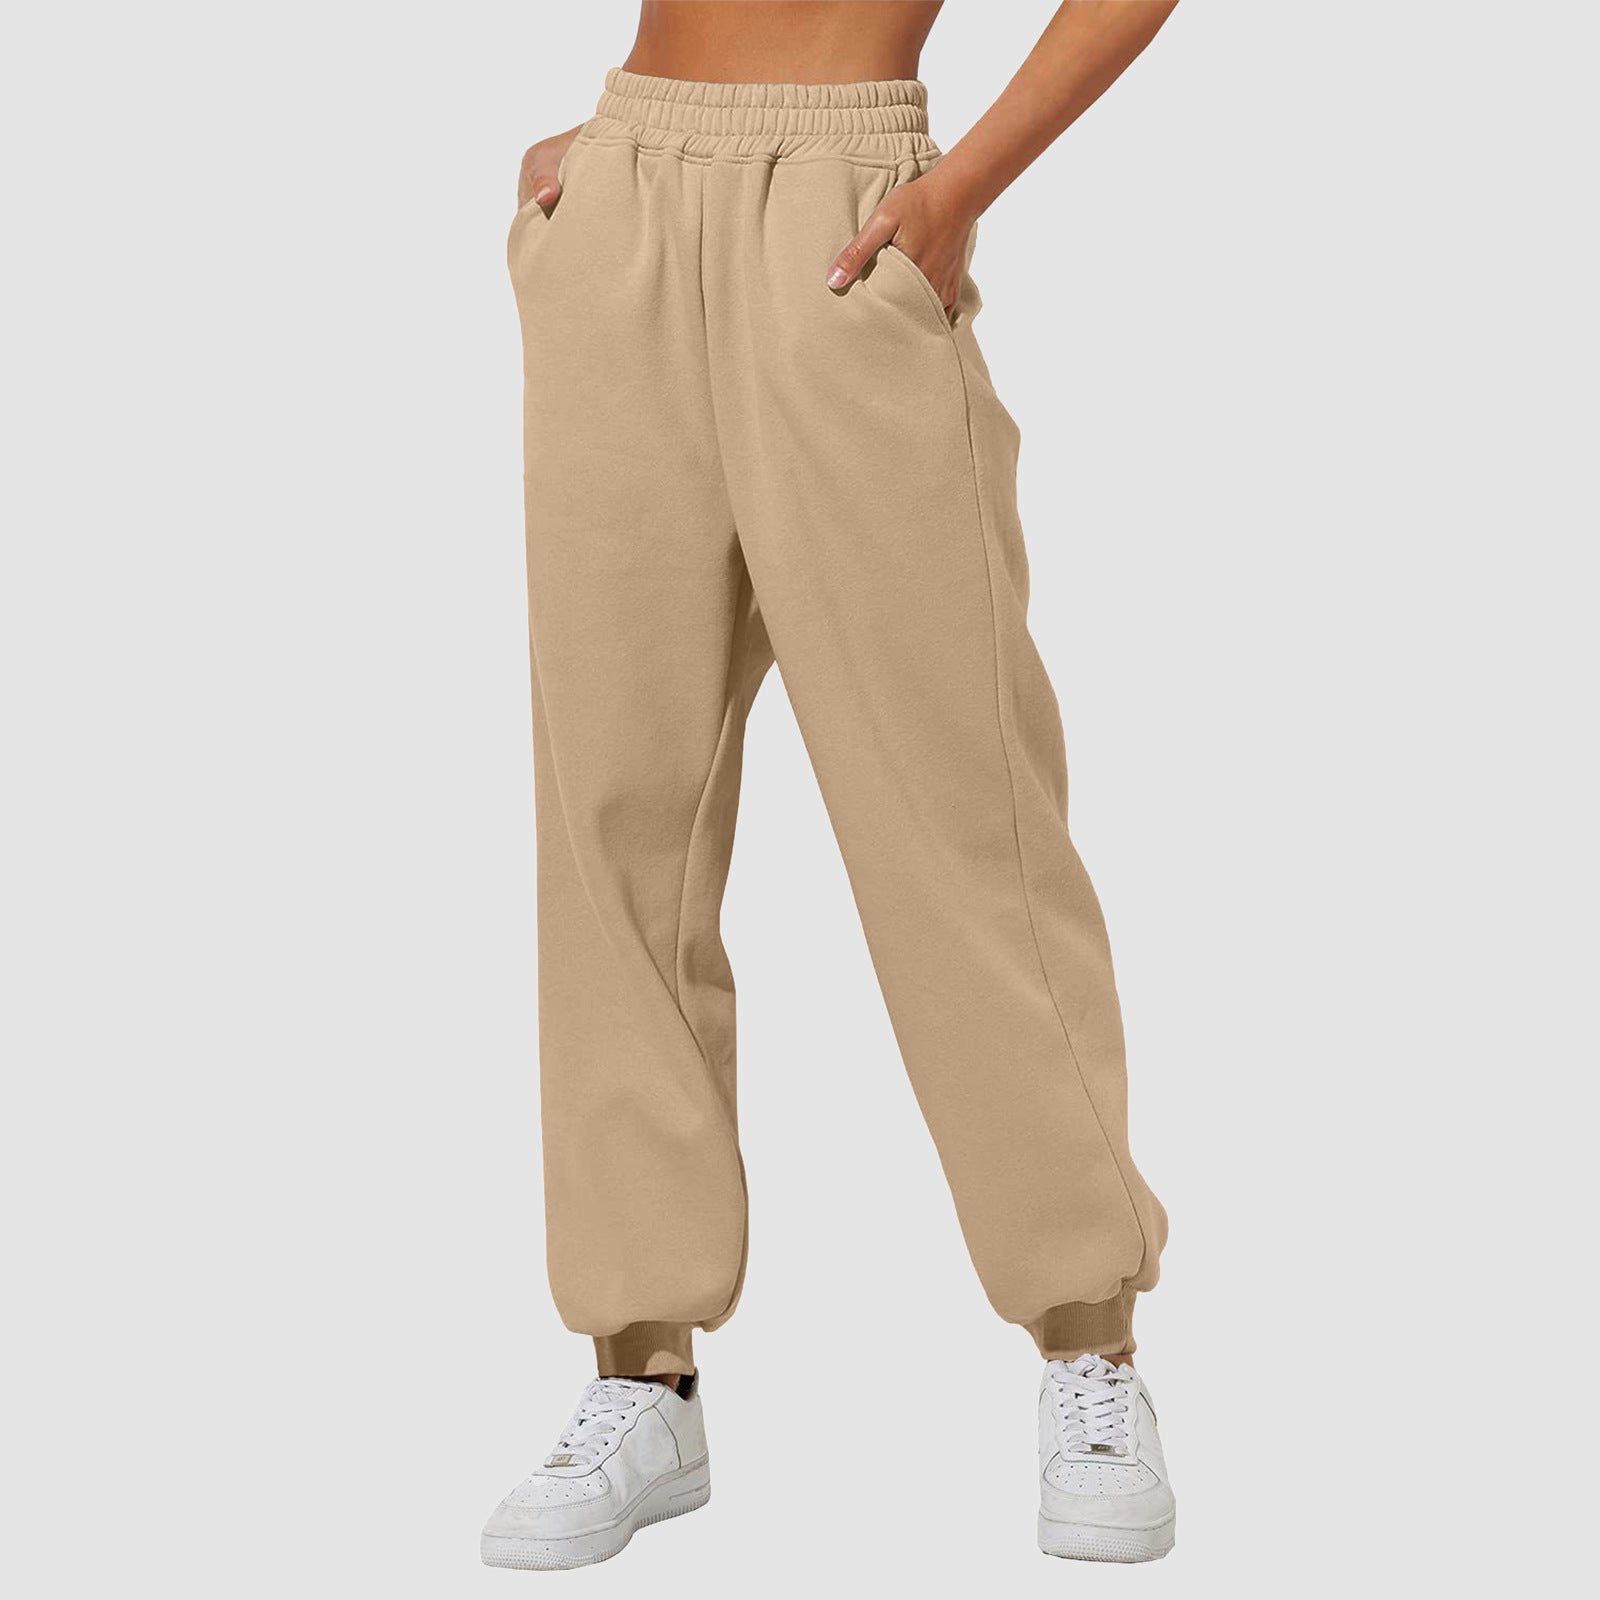 Women's Trousers With Pockets High Waist Loose Jogging Sports Pants